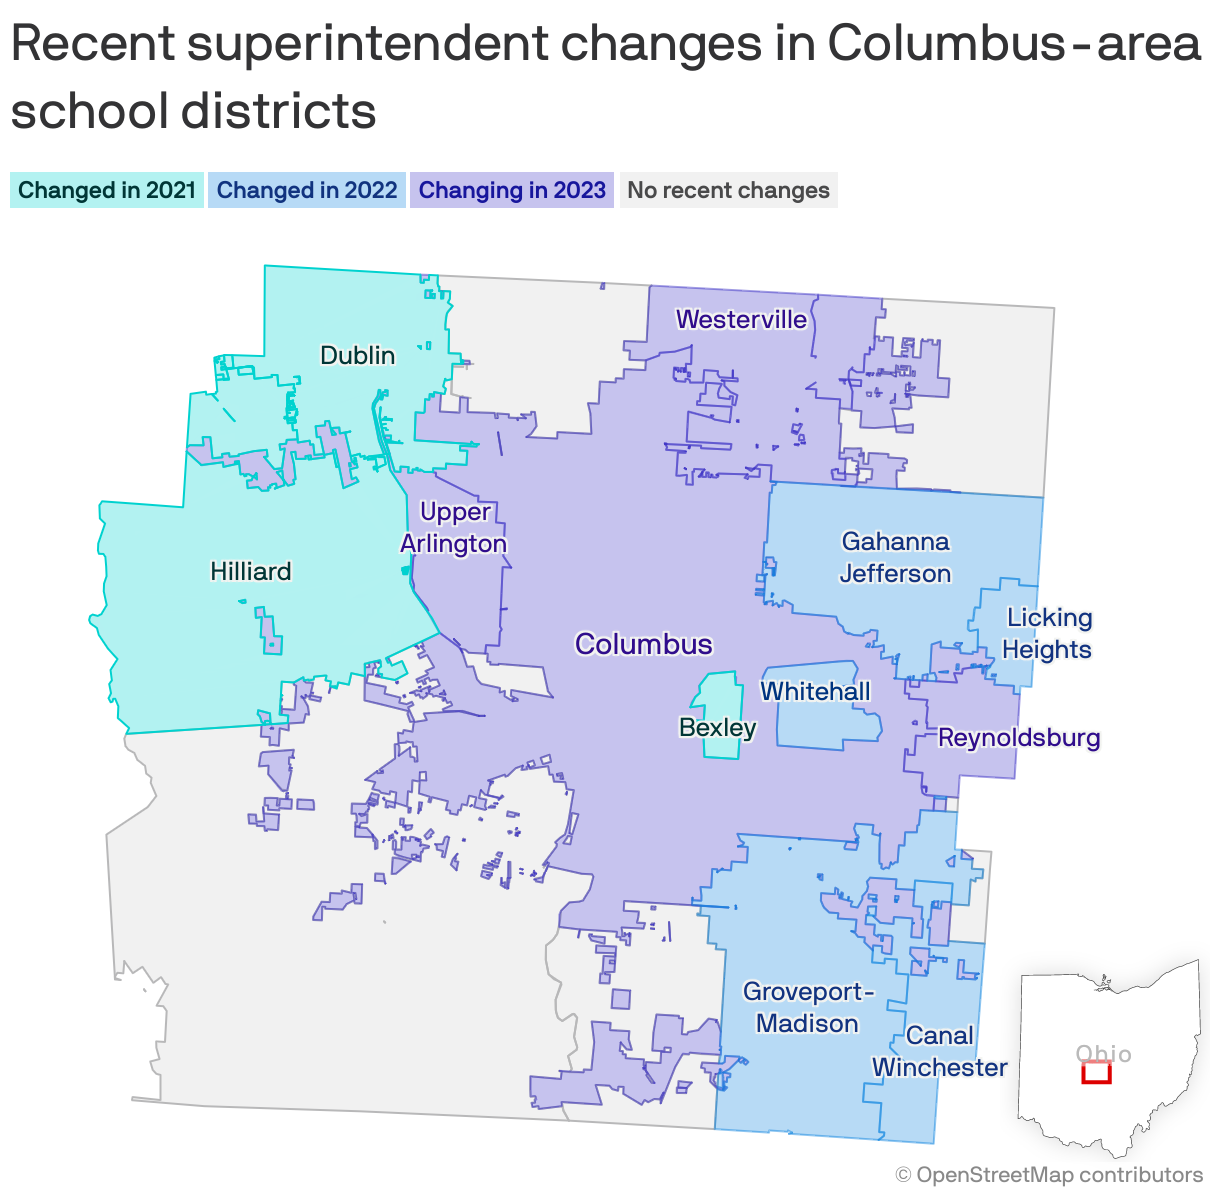 Recent superintendent changes in Columbus-area school districts